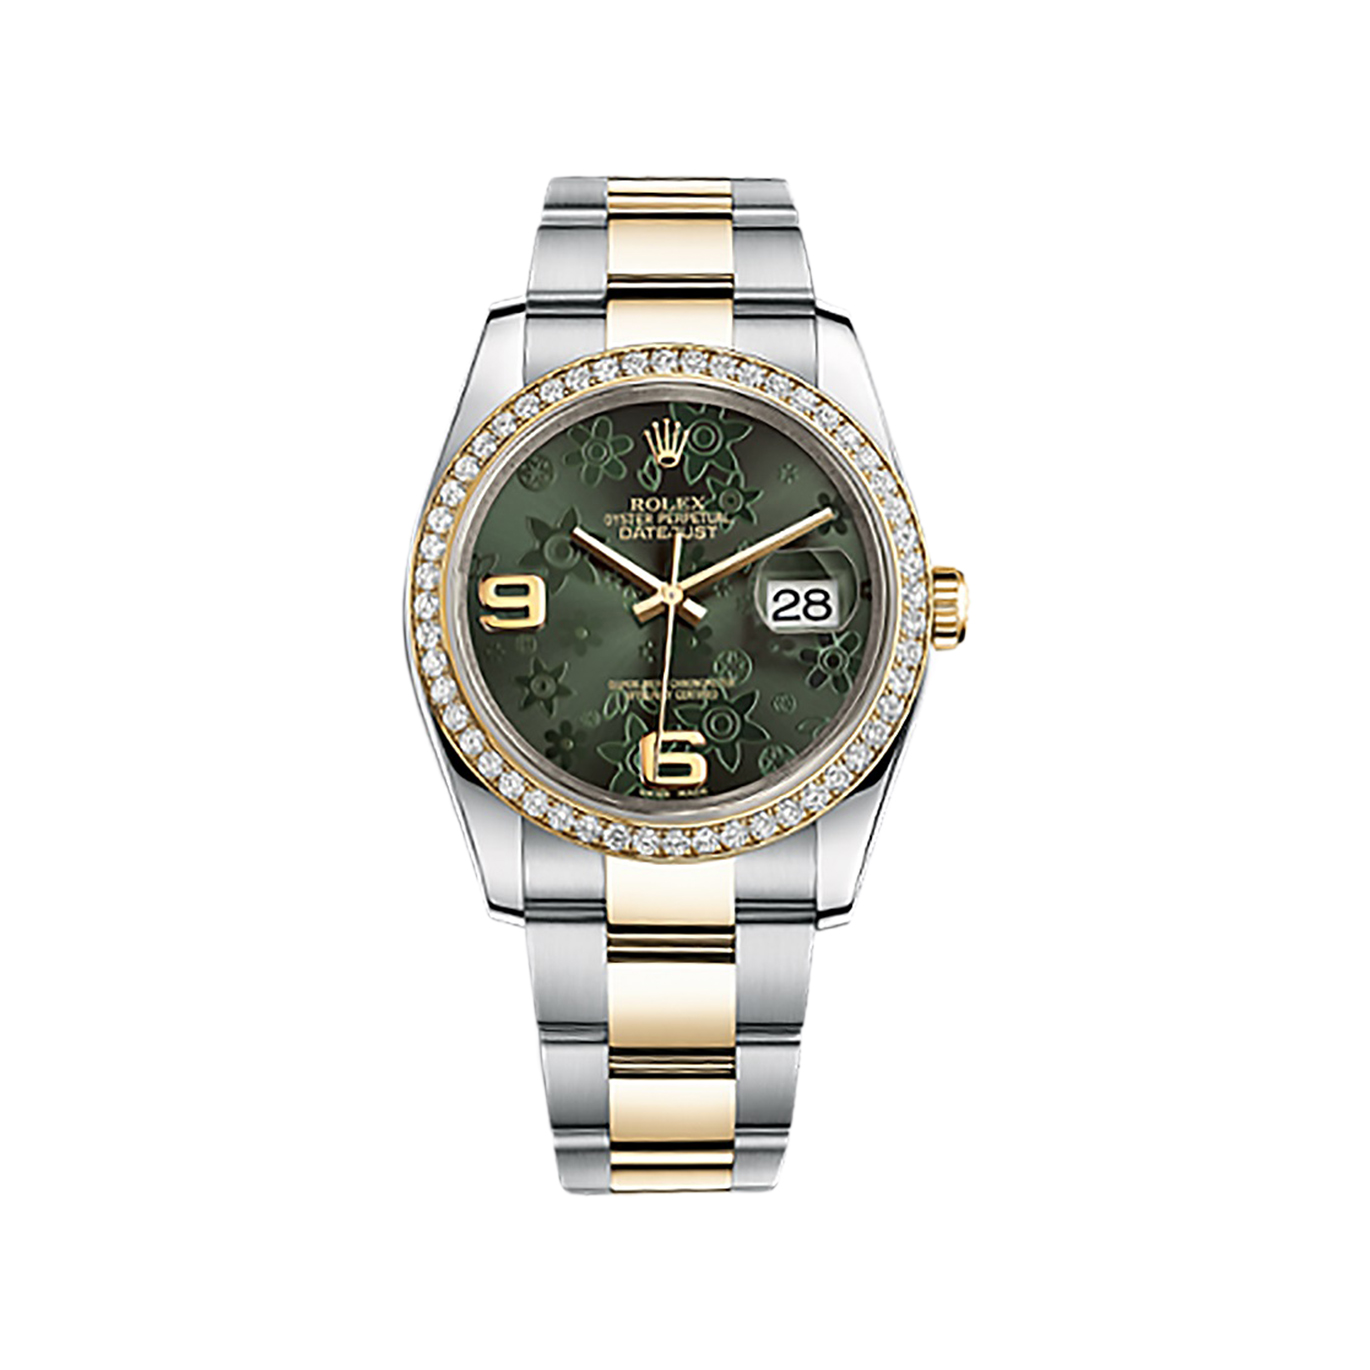 Datejust 36 116243 Gold & Stainless Steel Watch (Green Floral Motif) - Click Image to Close